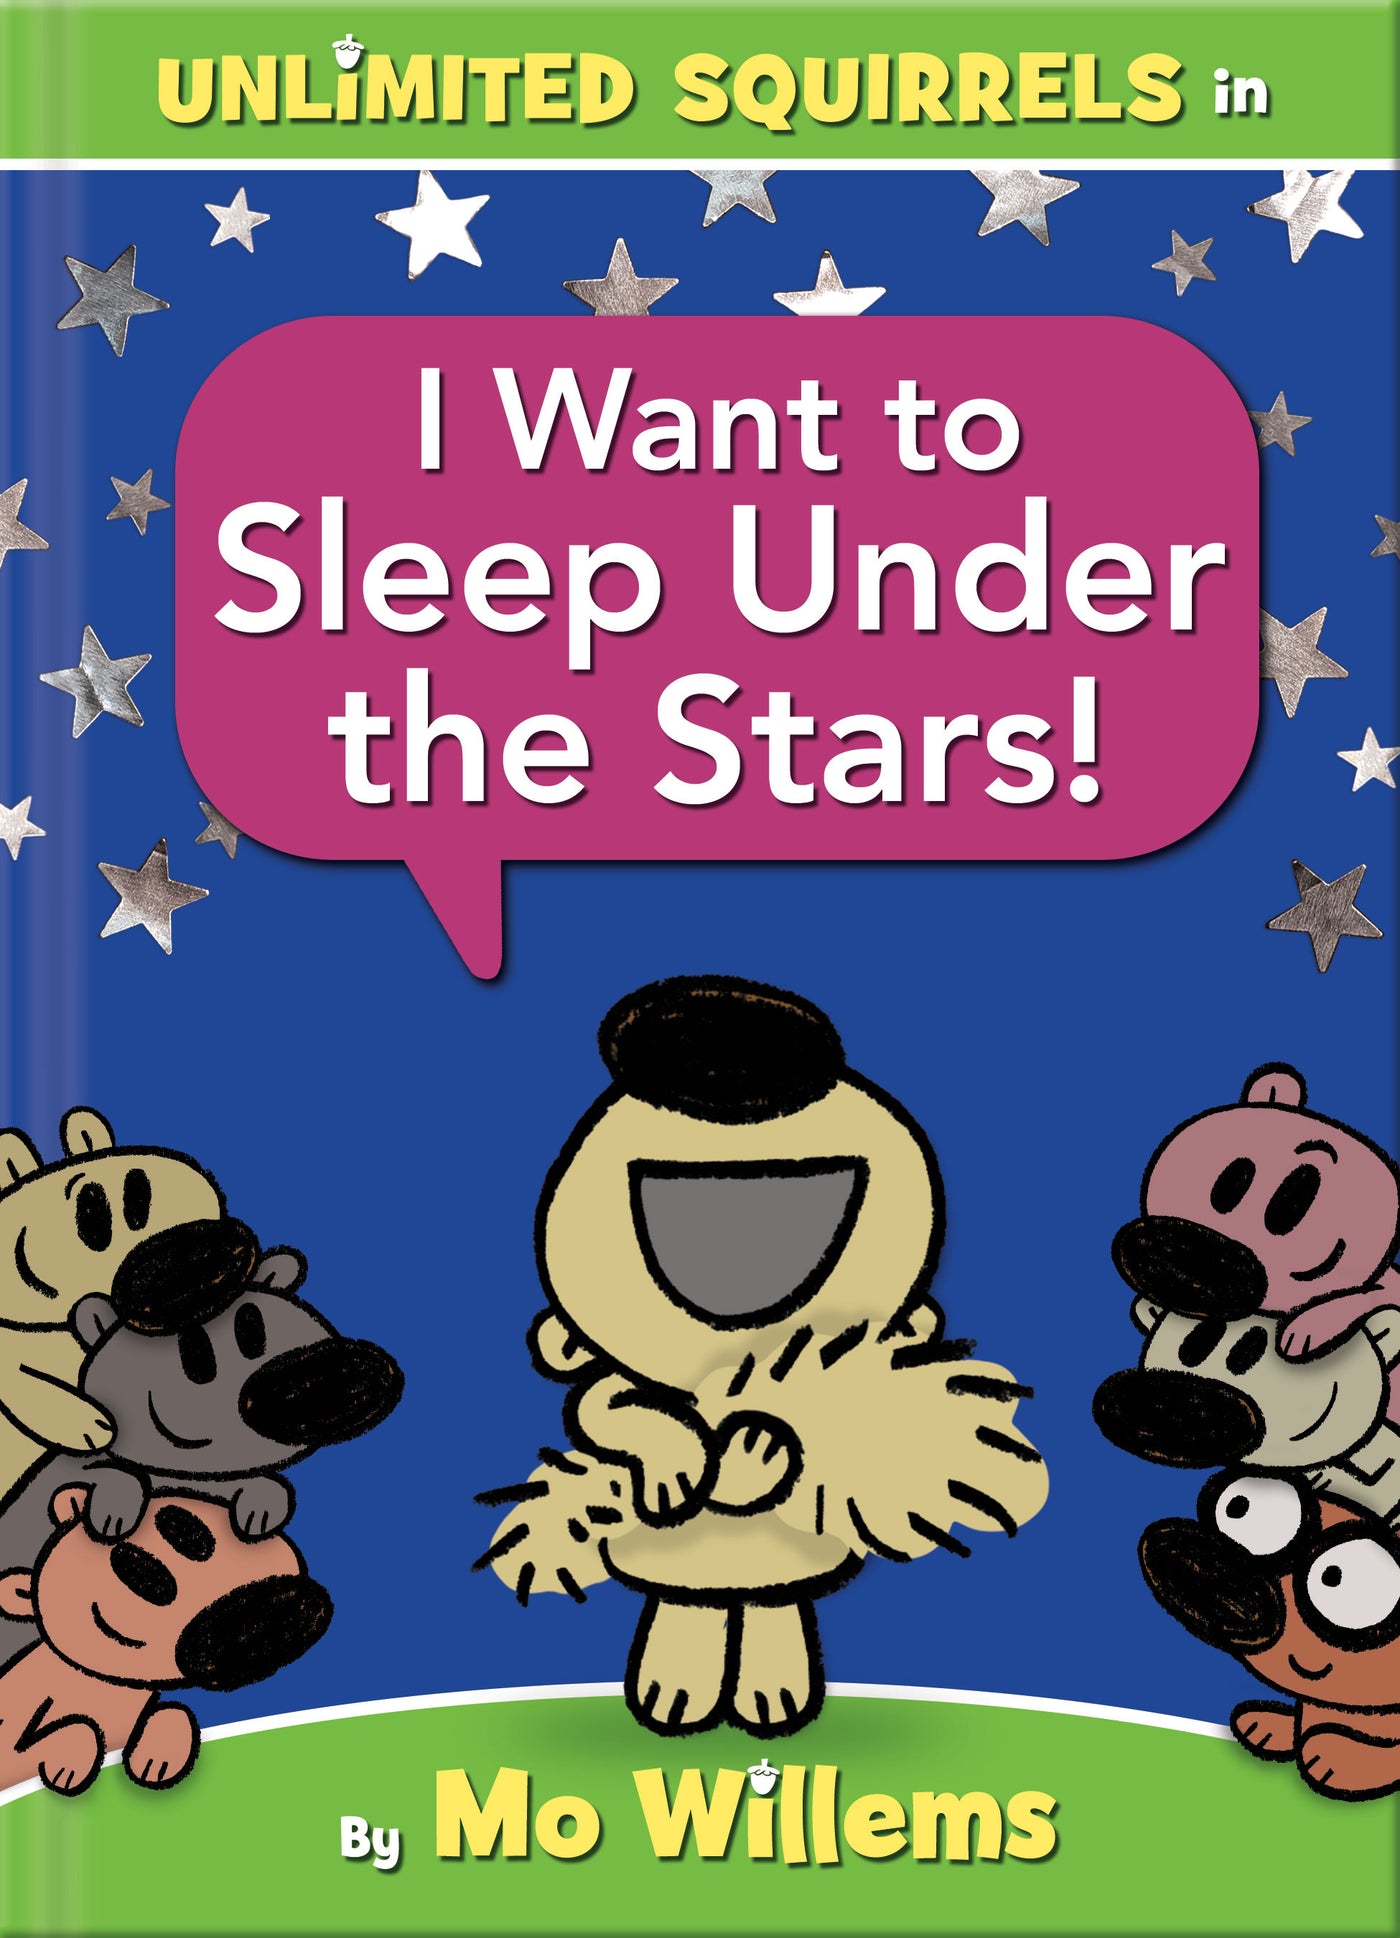 I Want to Sleep Under the Stars!-An Unlimited Squirrels Book